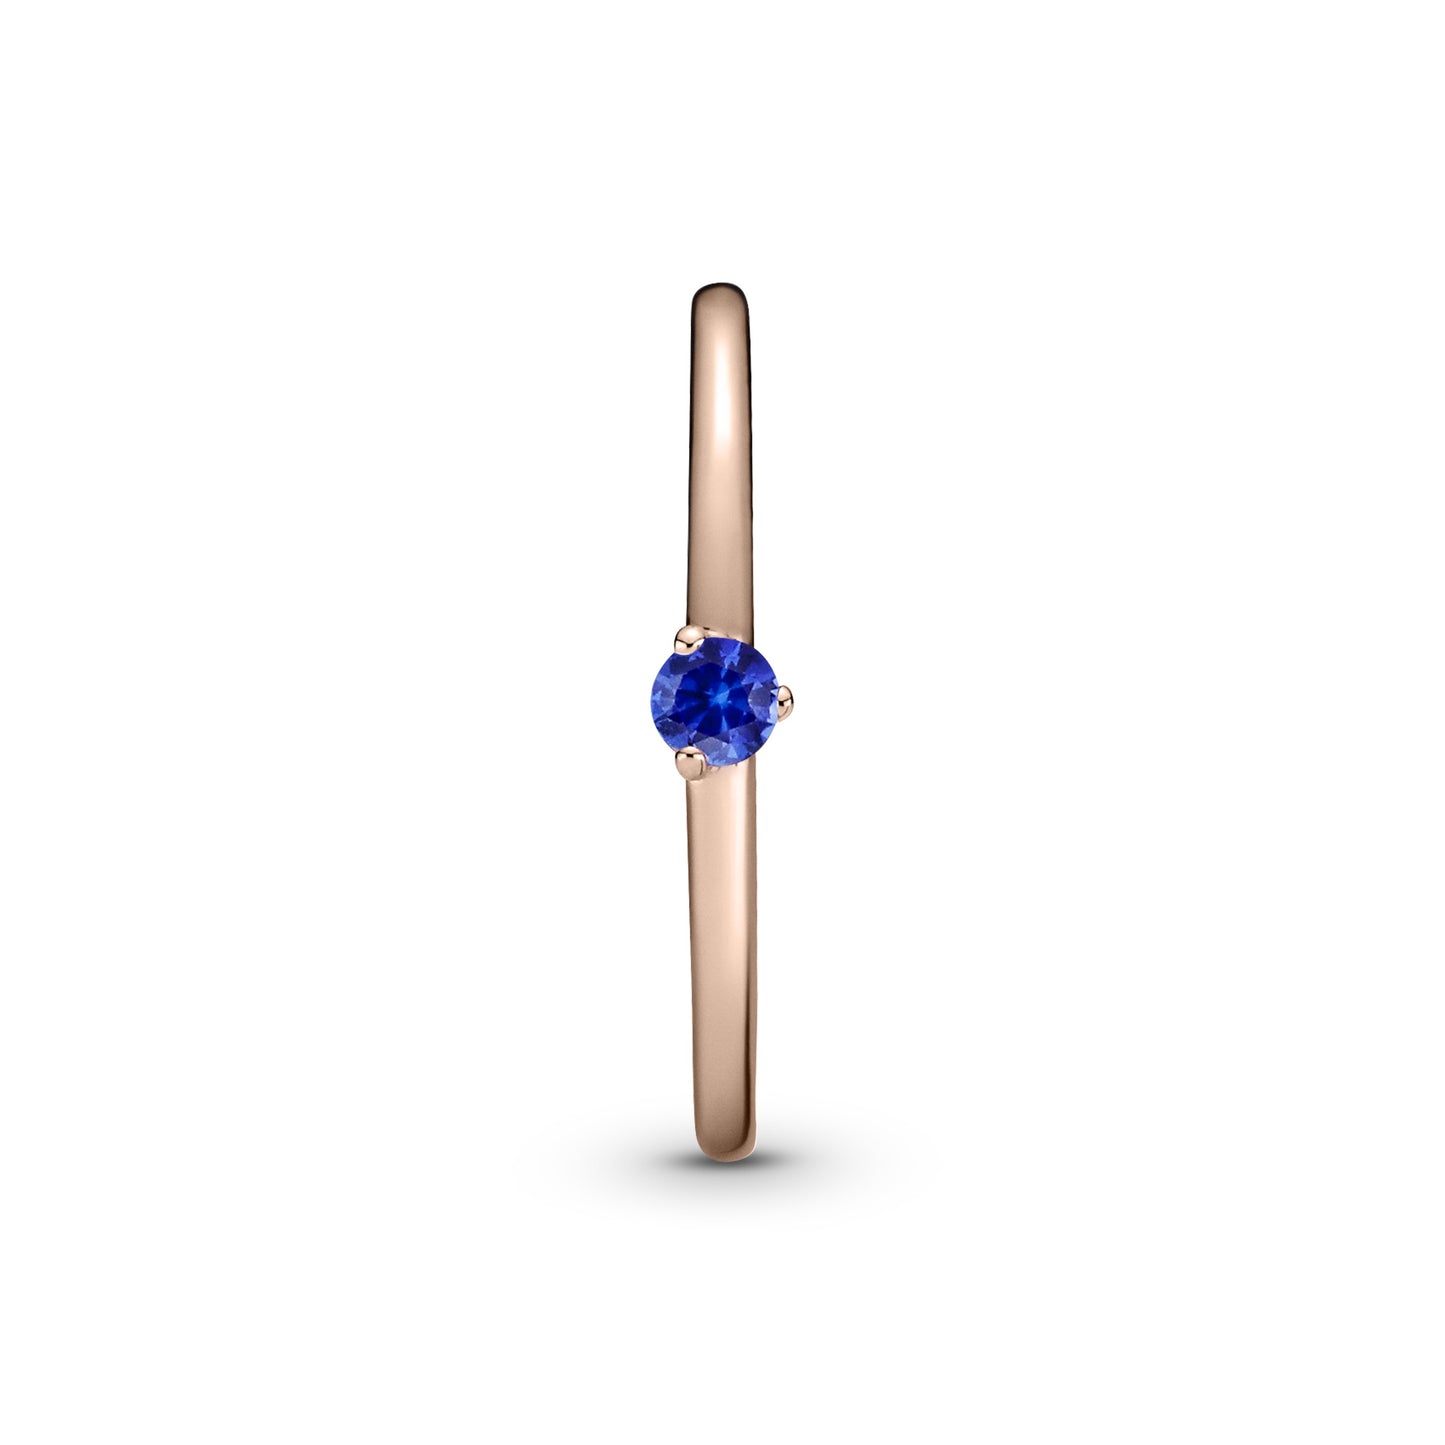 Pandora 14k rose gold-plated Solitaire Ring Blue Crystal